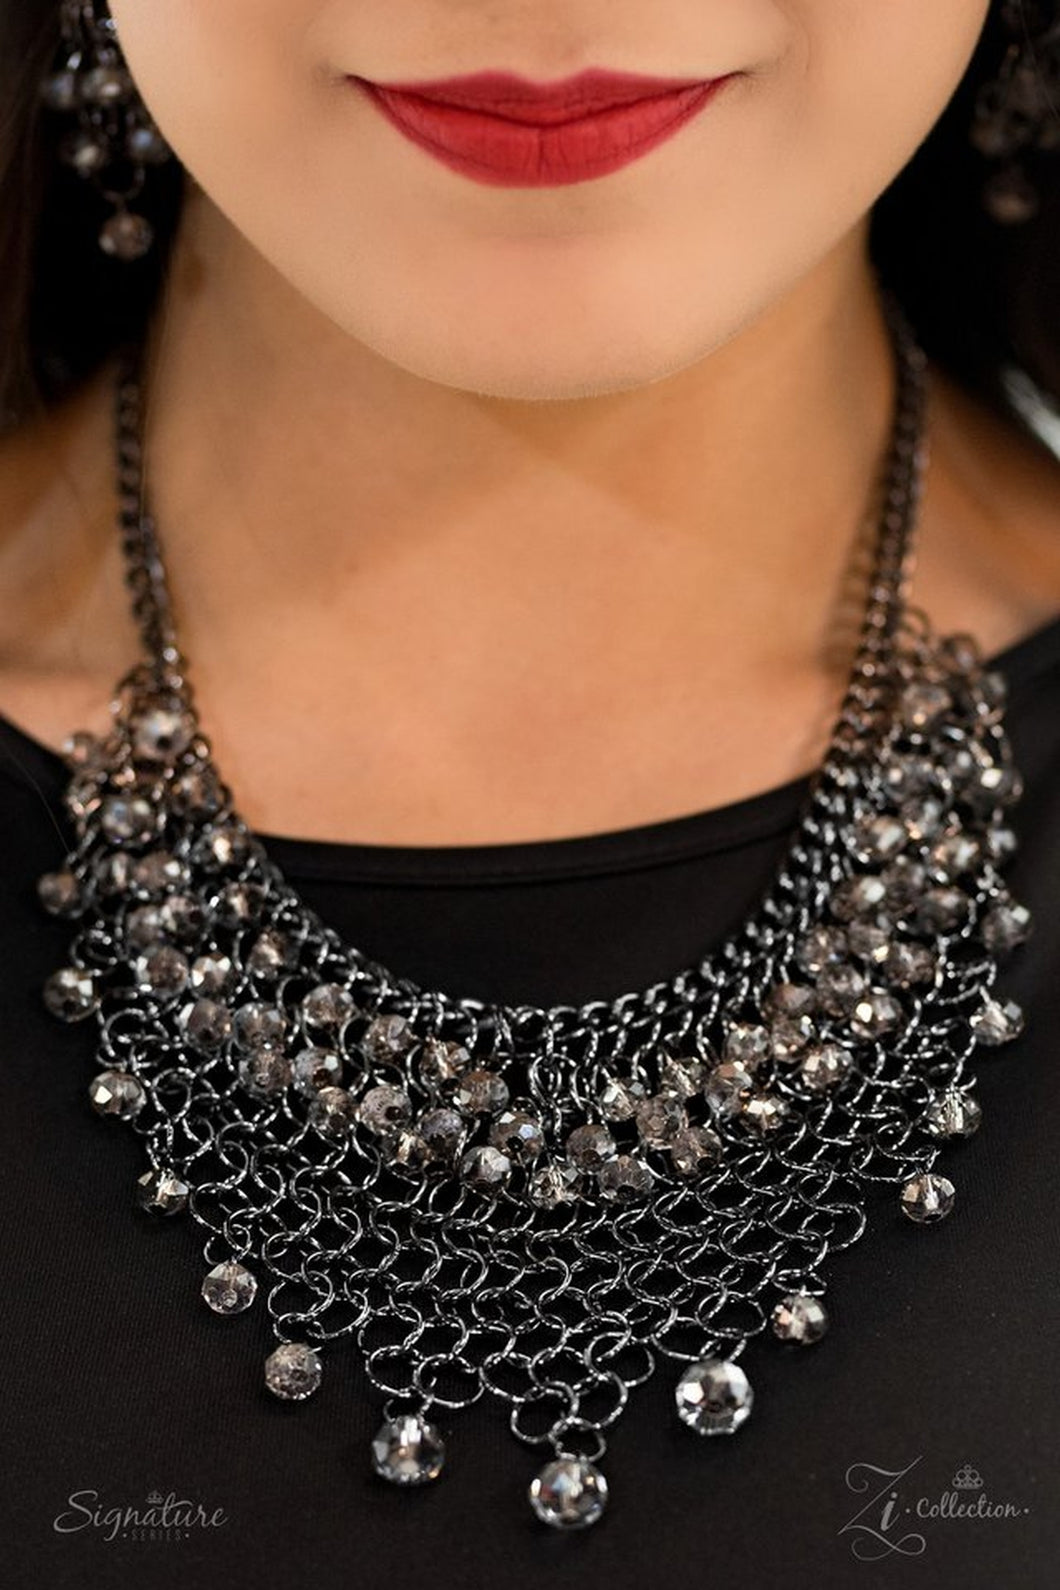 The Nina - Zi Collection Necklace